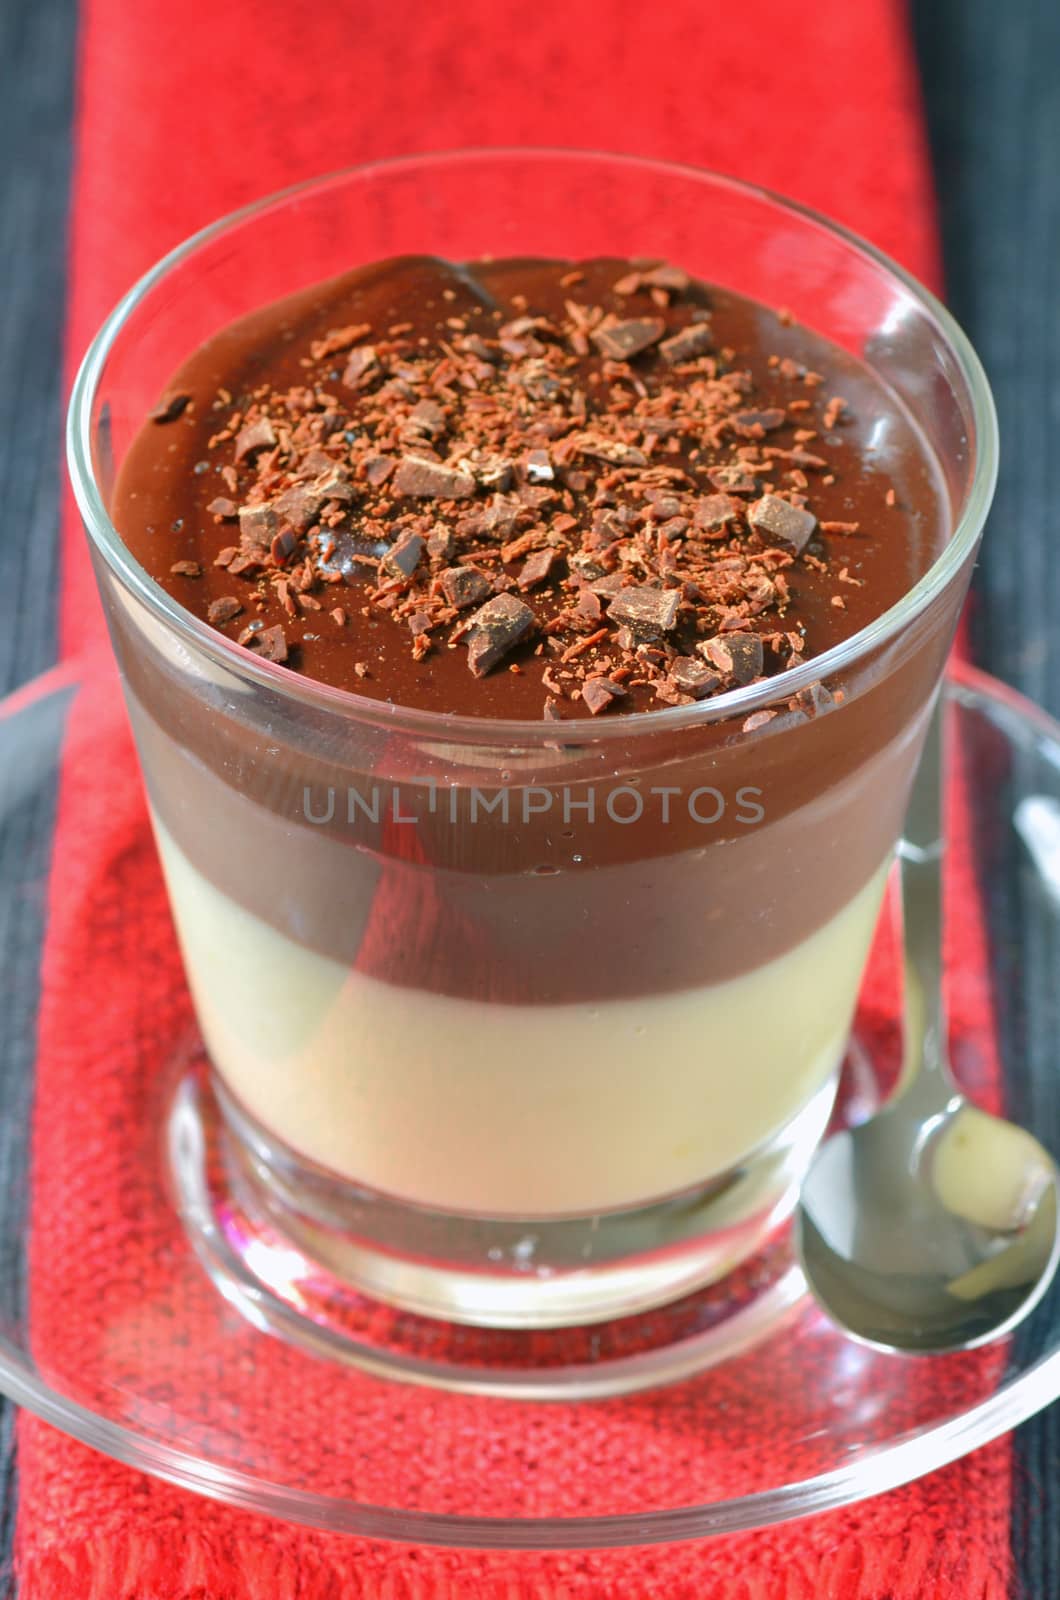 Triple Chocolate Mousse by mady70